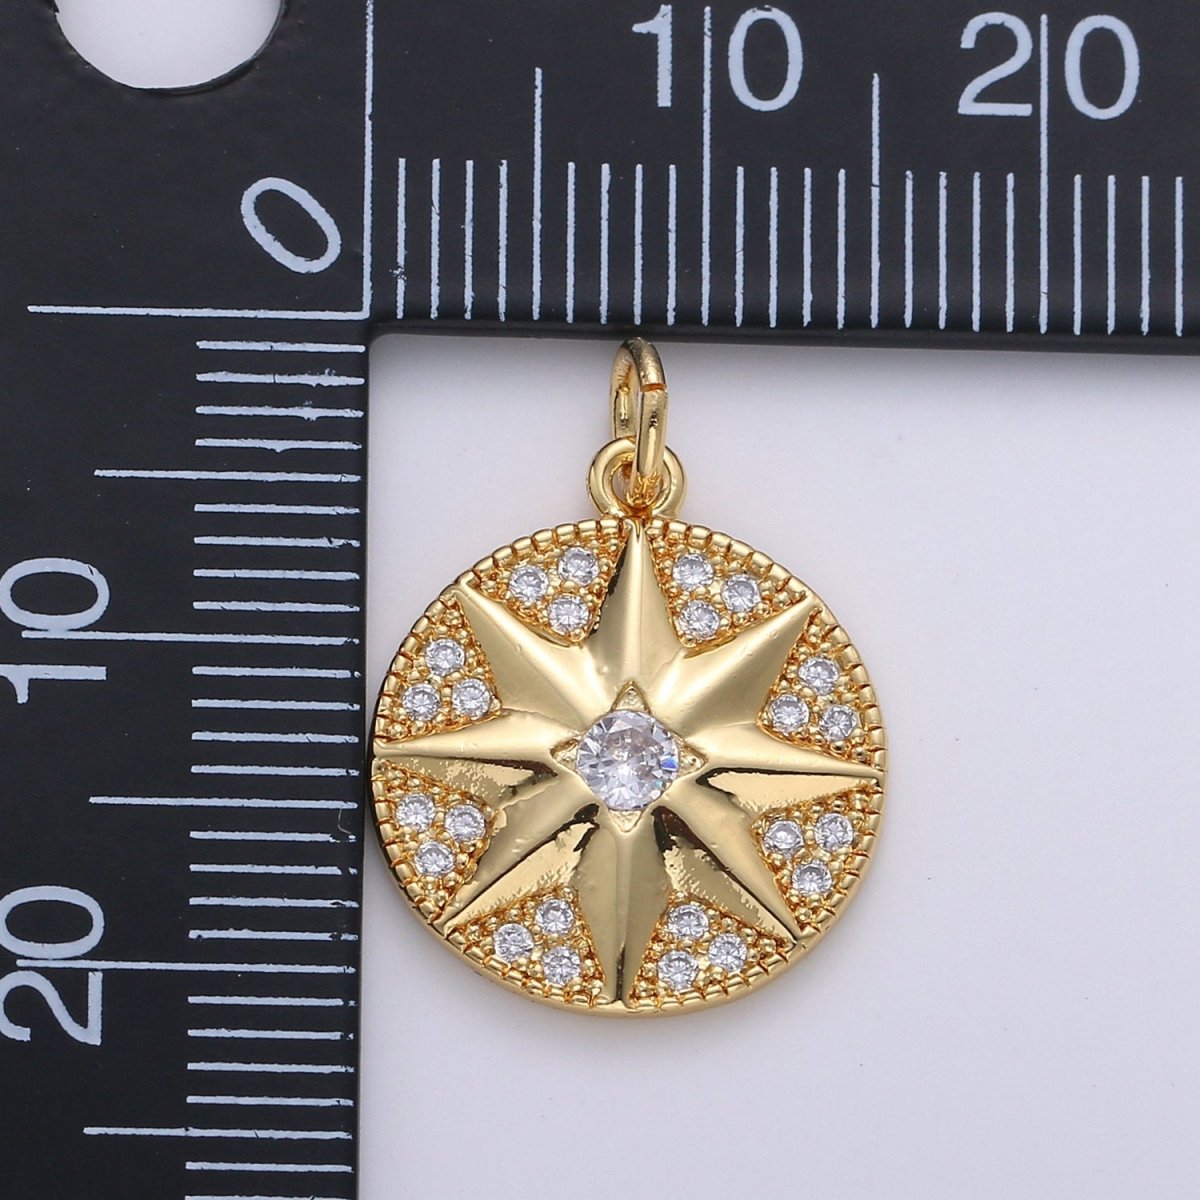 Dainty Gold North star Charm, starburst gold Pendant, dainty minimalist Jewelry Making in 24k Gold Filled Findings D-293 - DLUXCA